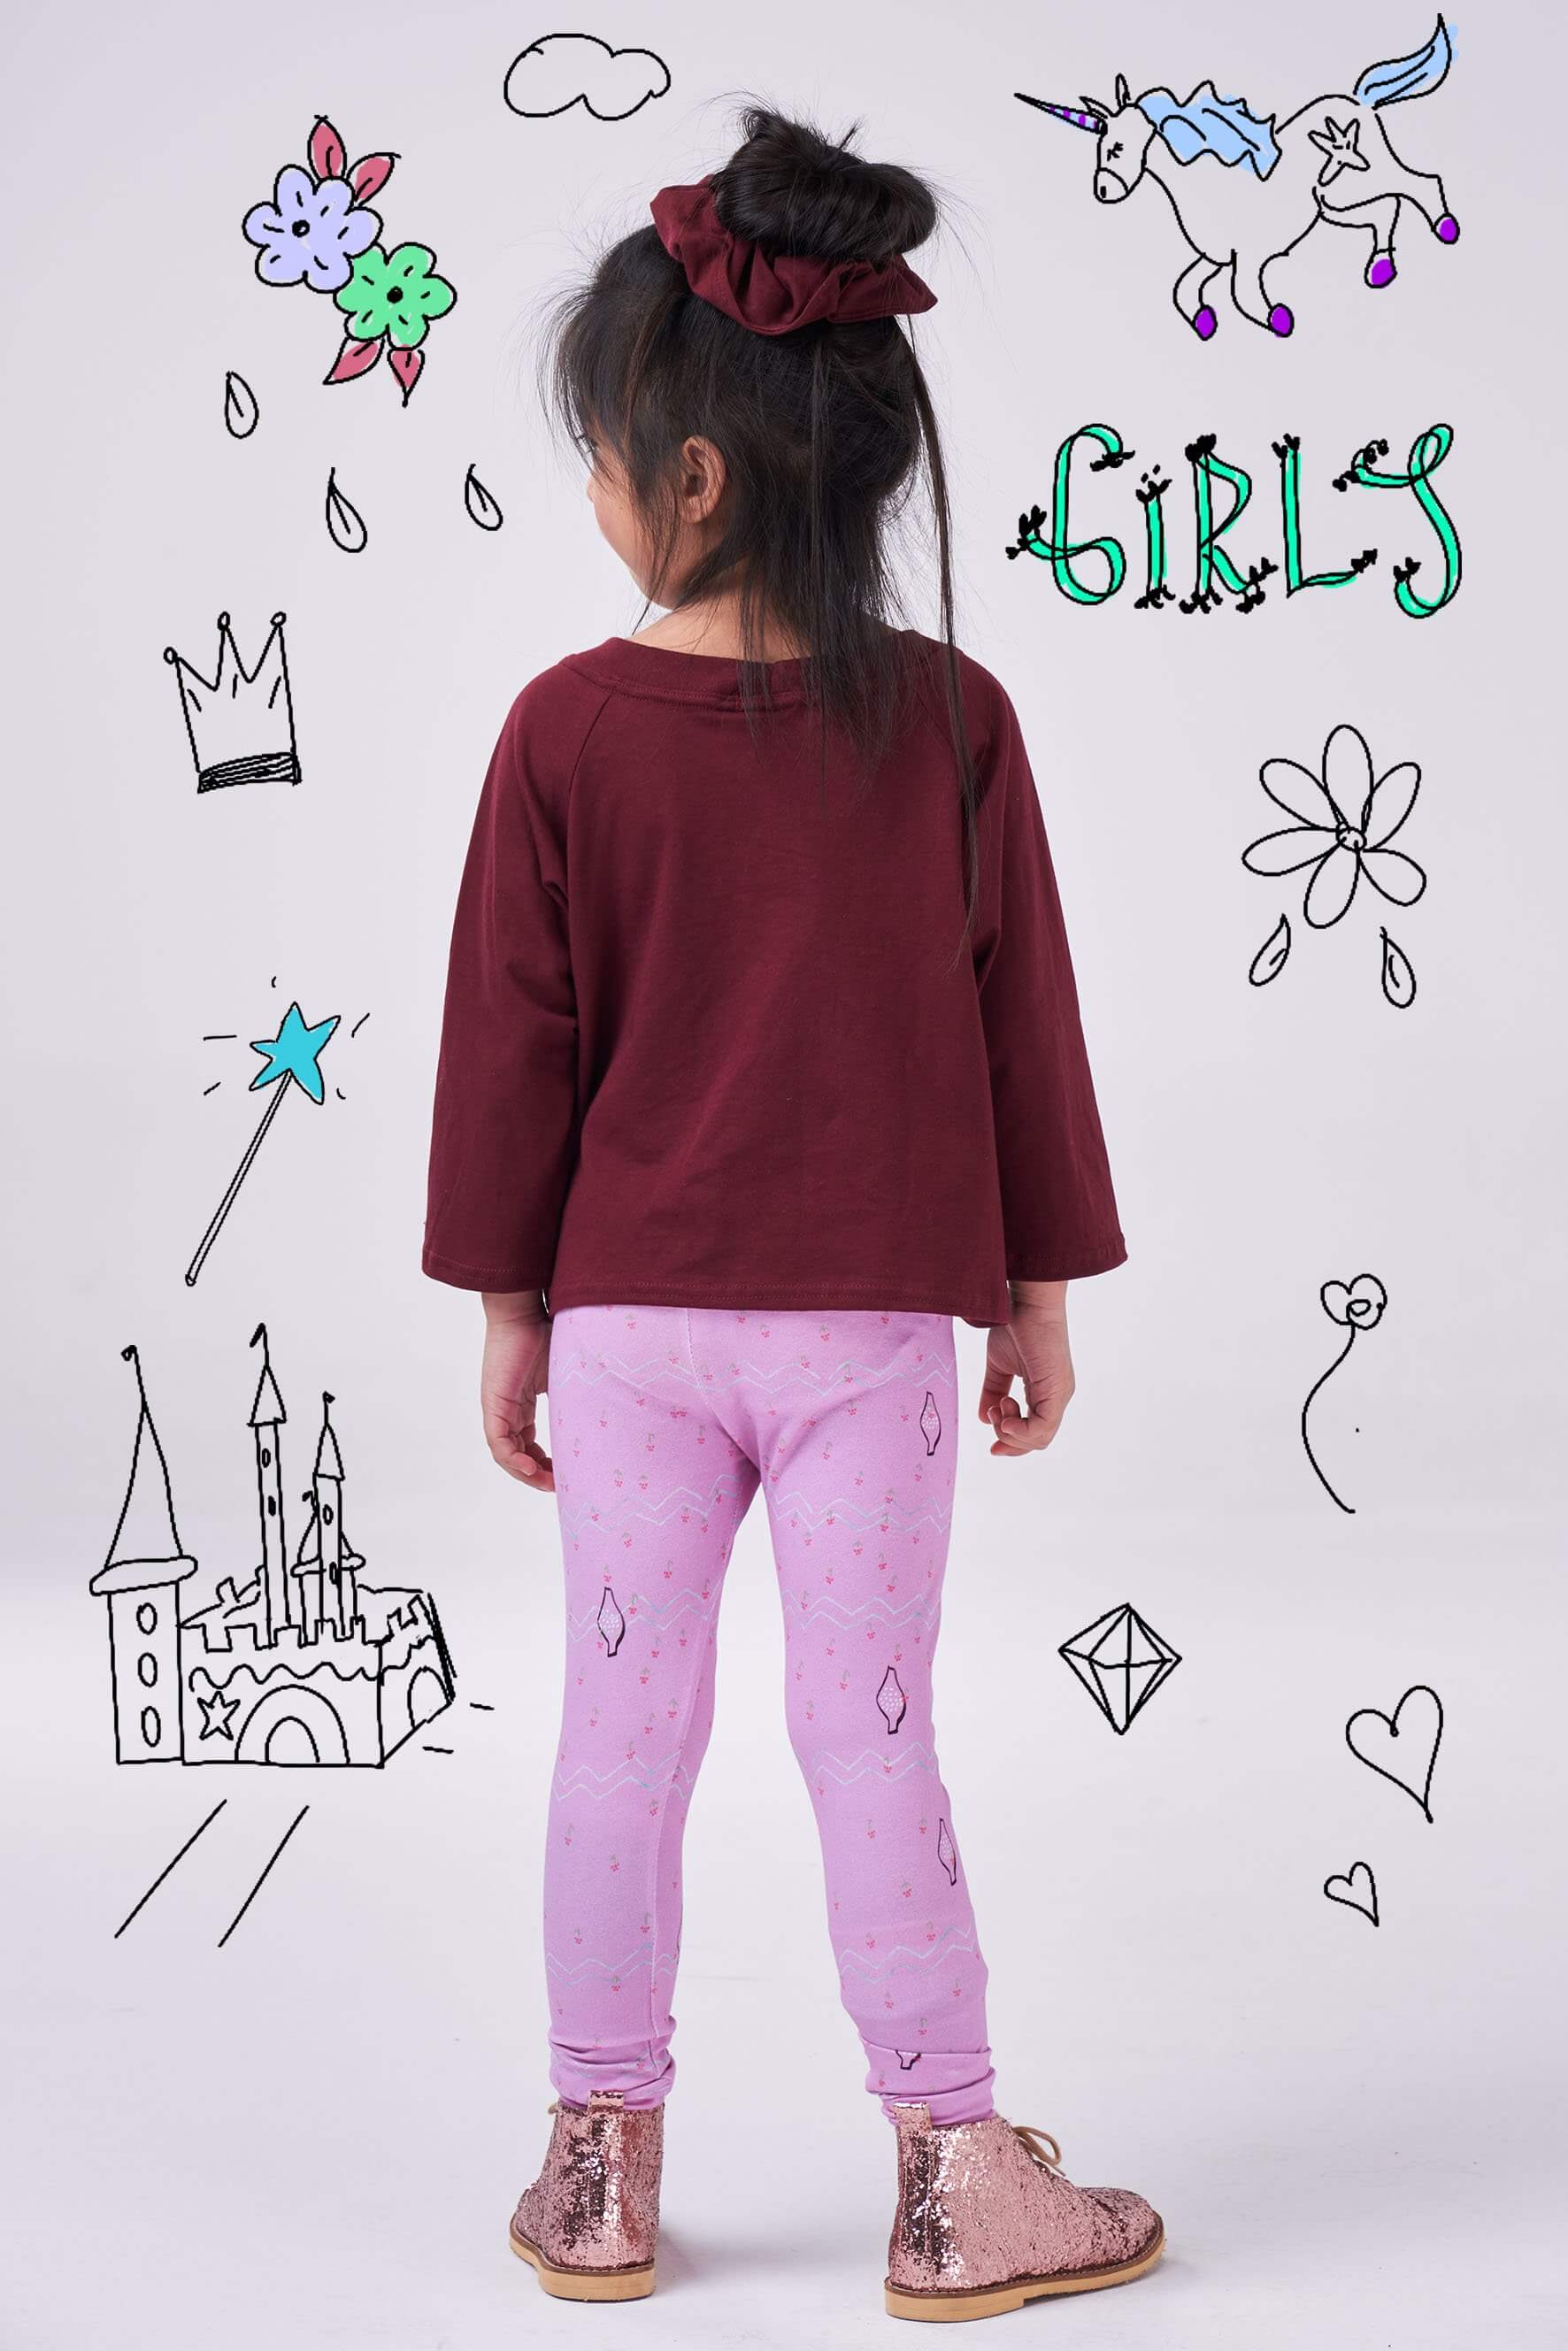 The Pink Dragonfly Leggings - CooCootales